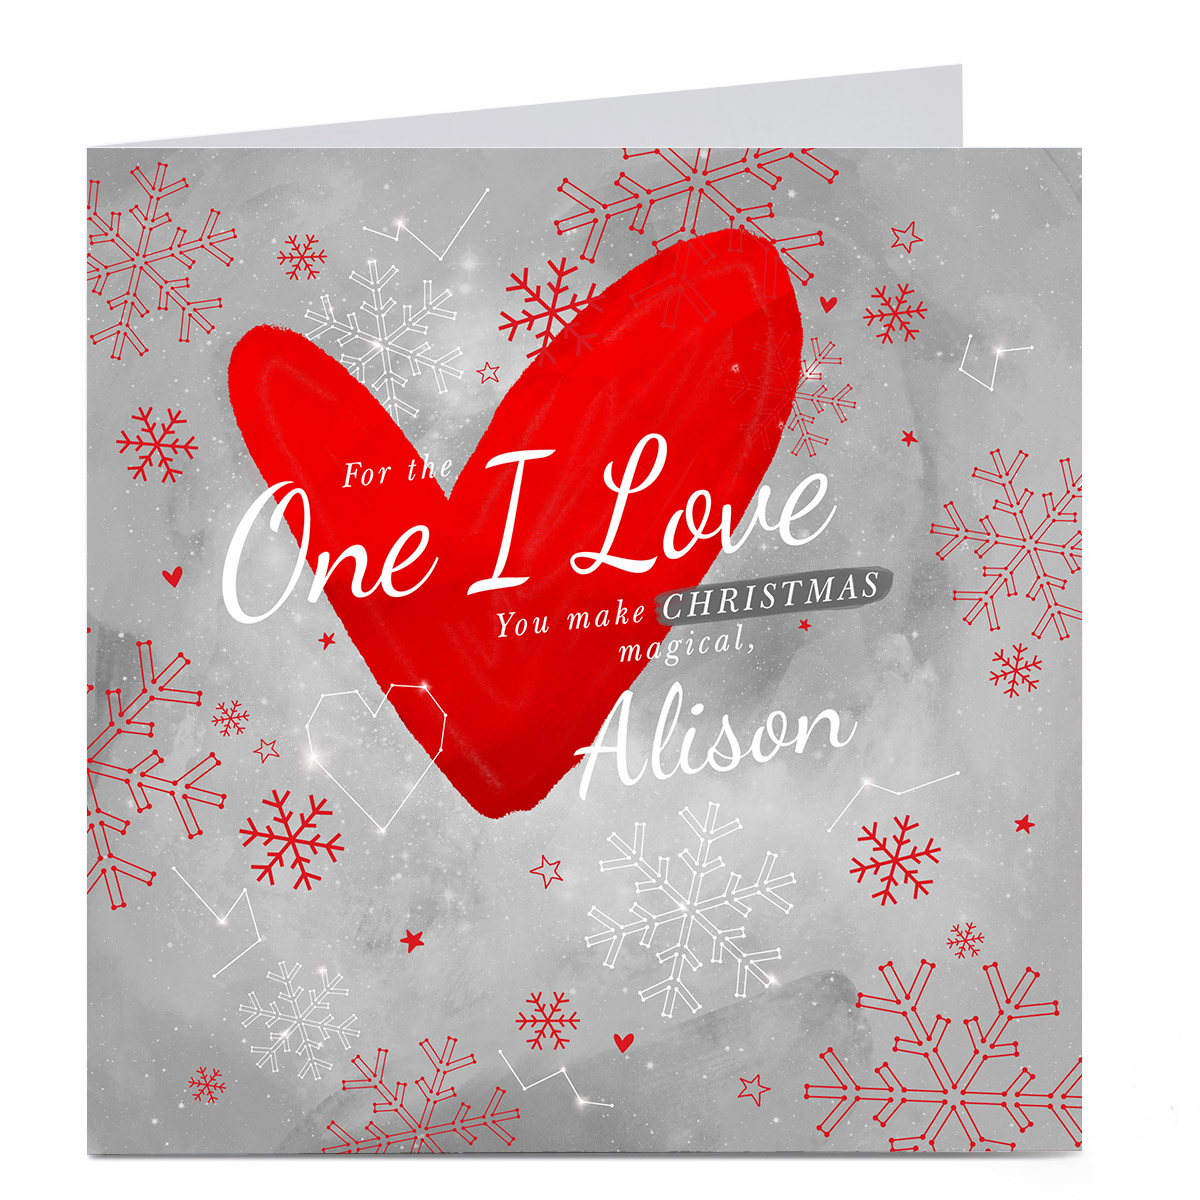 Personalised Christmas Card - For The One I Love